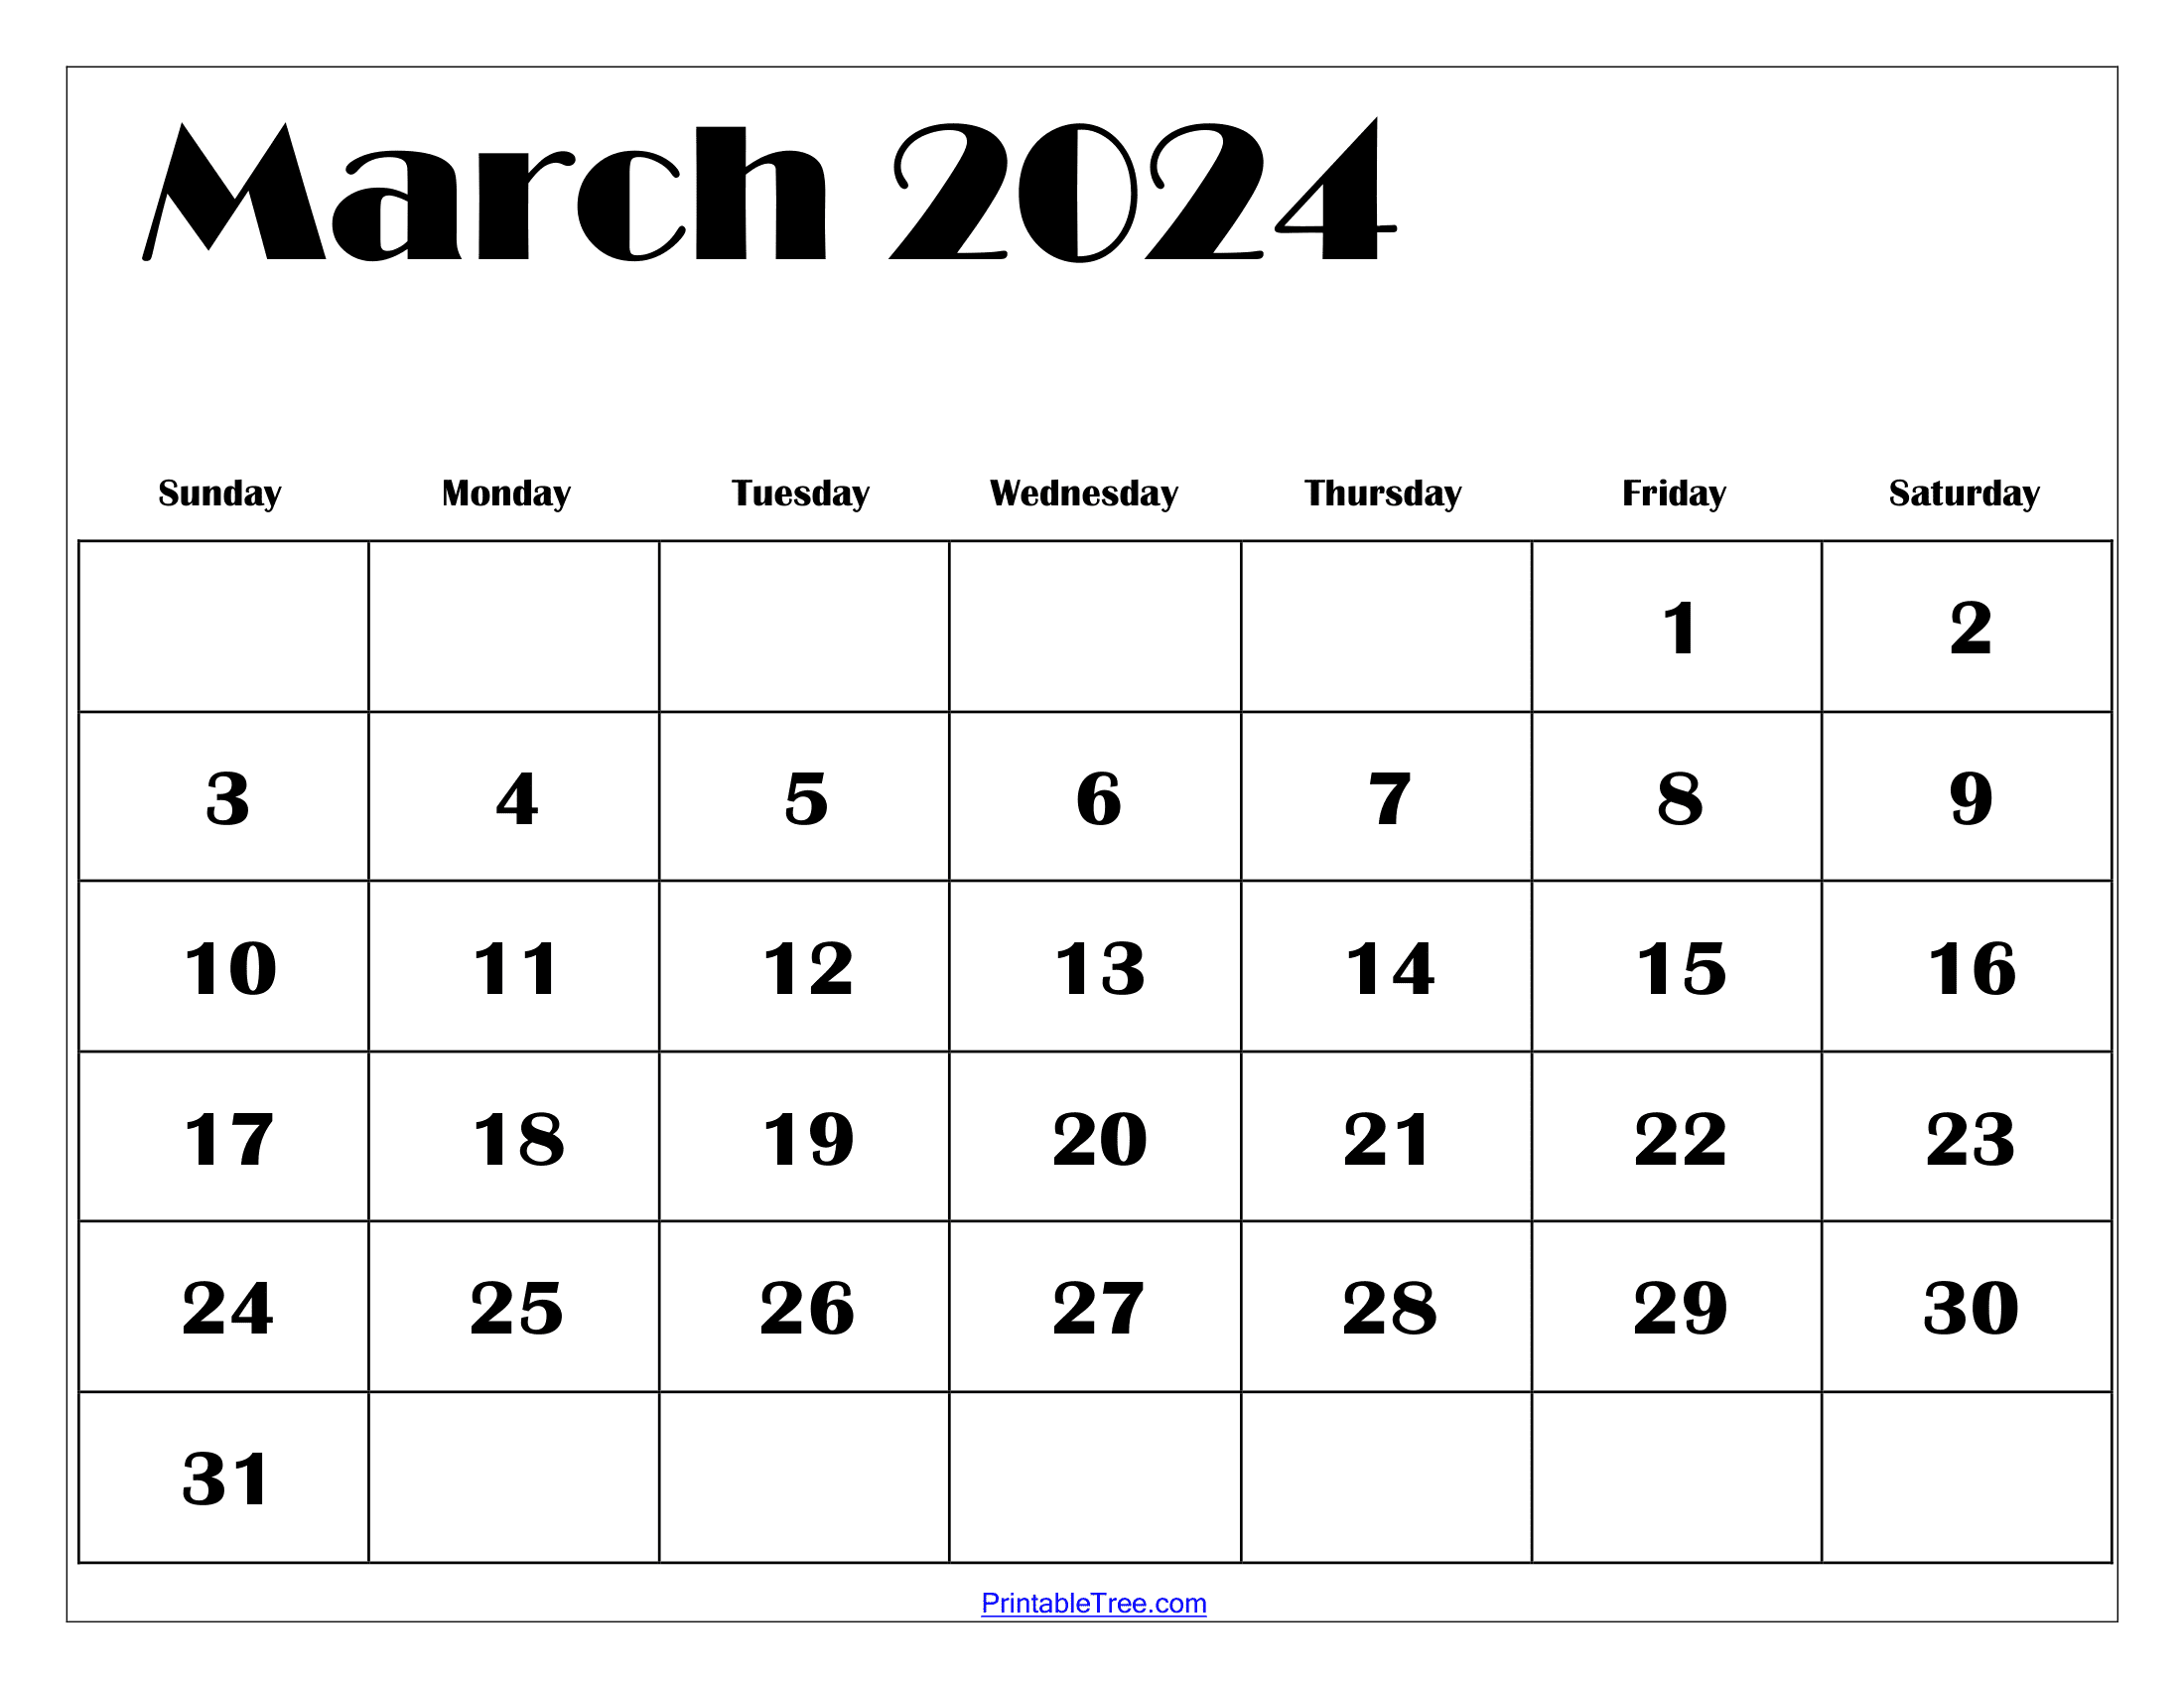 March 2024 Calendar Printable Pdf With Holidays Template Free for March Printable Calendar 2024 Free